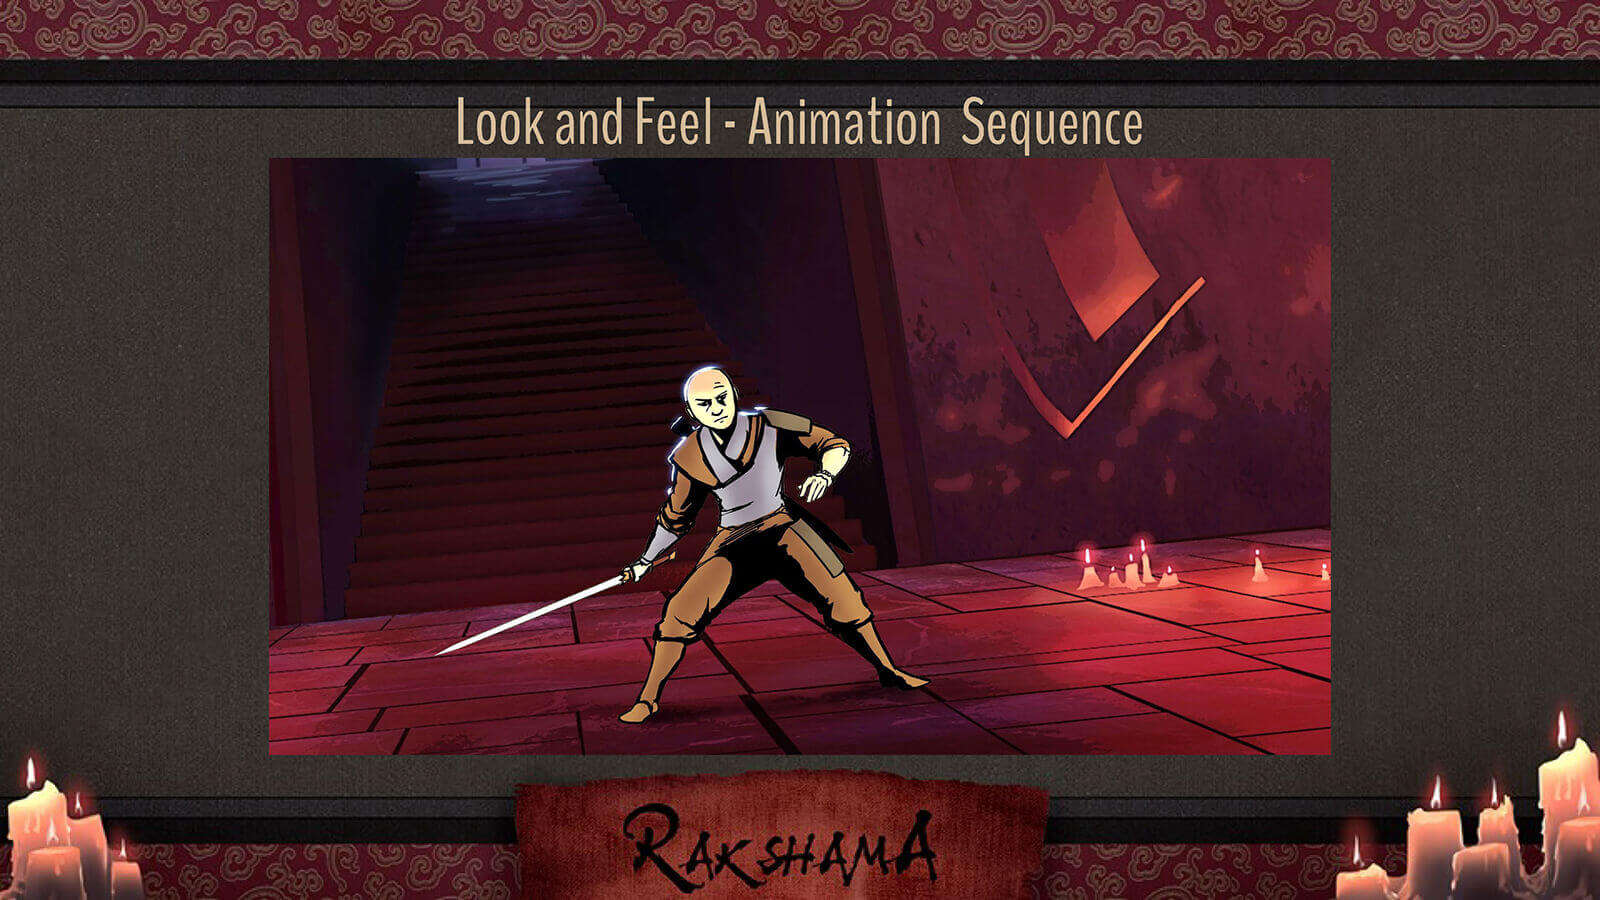 Look and Feel slide for the film Rakshama, depicting action sequence of a warrior with a drawn sword in a candlelit room